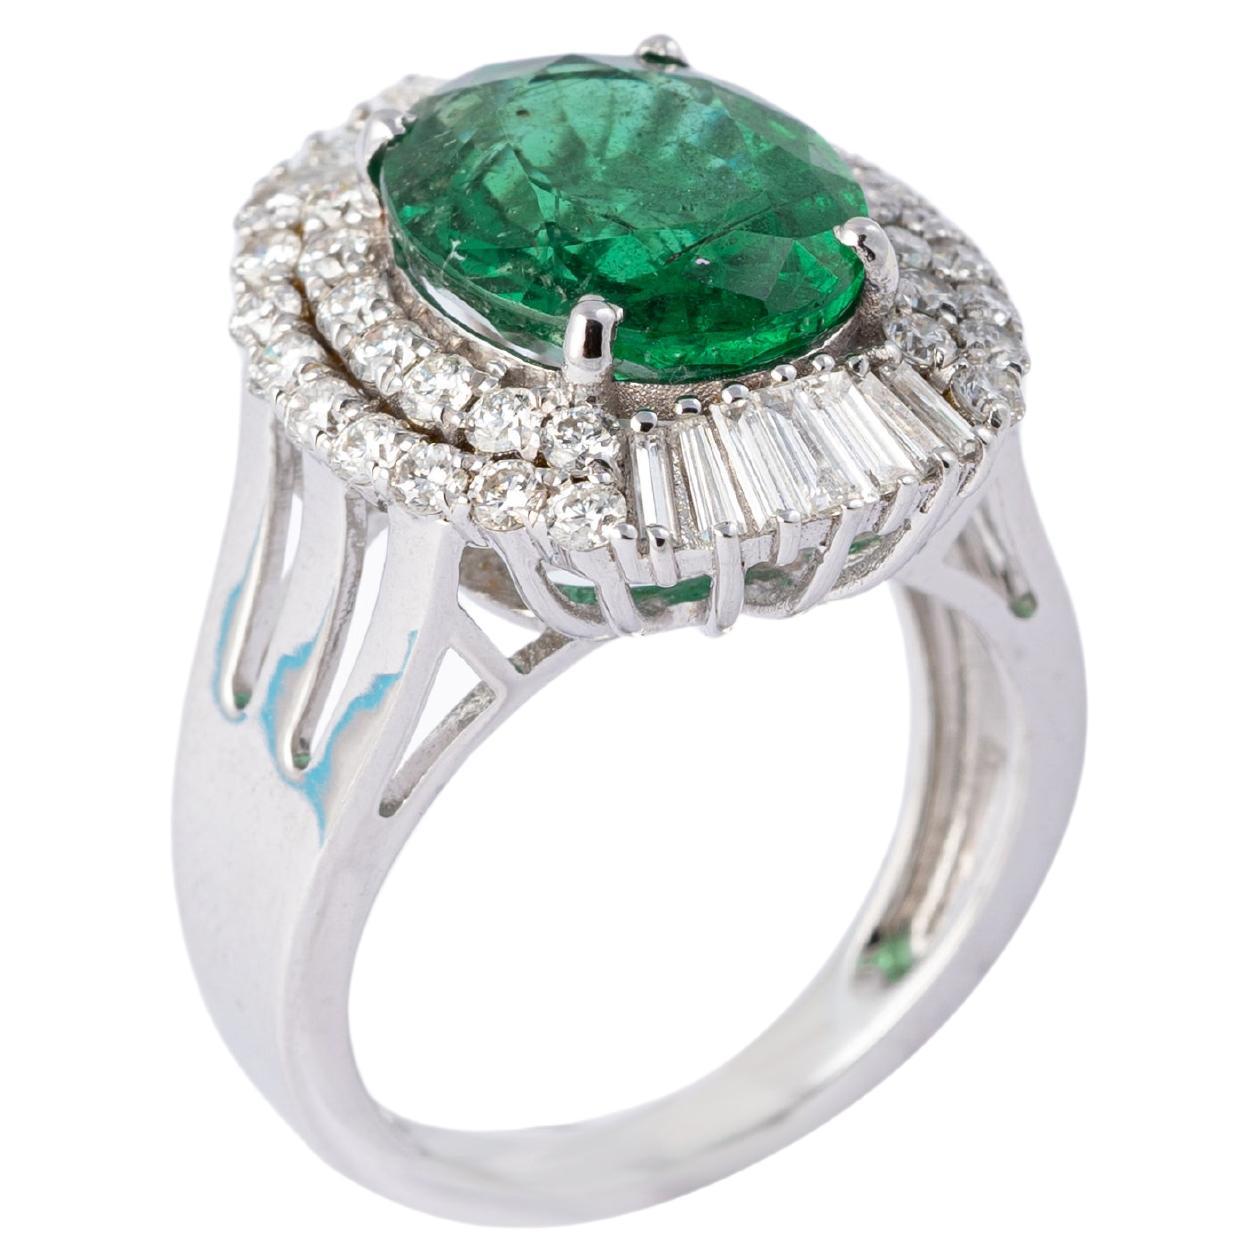 Natural Zambian Emerald 4.54 cts with Diamonds 1.47cts ring and 14k Gold For Sale